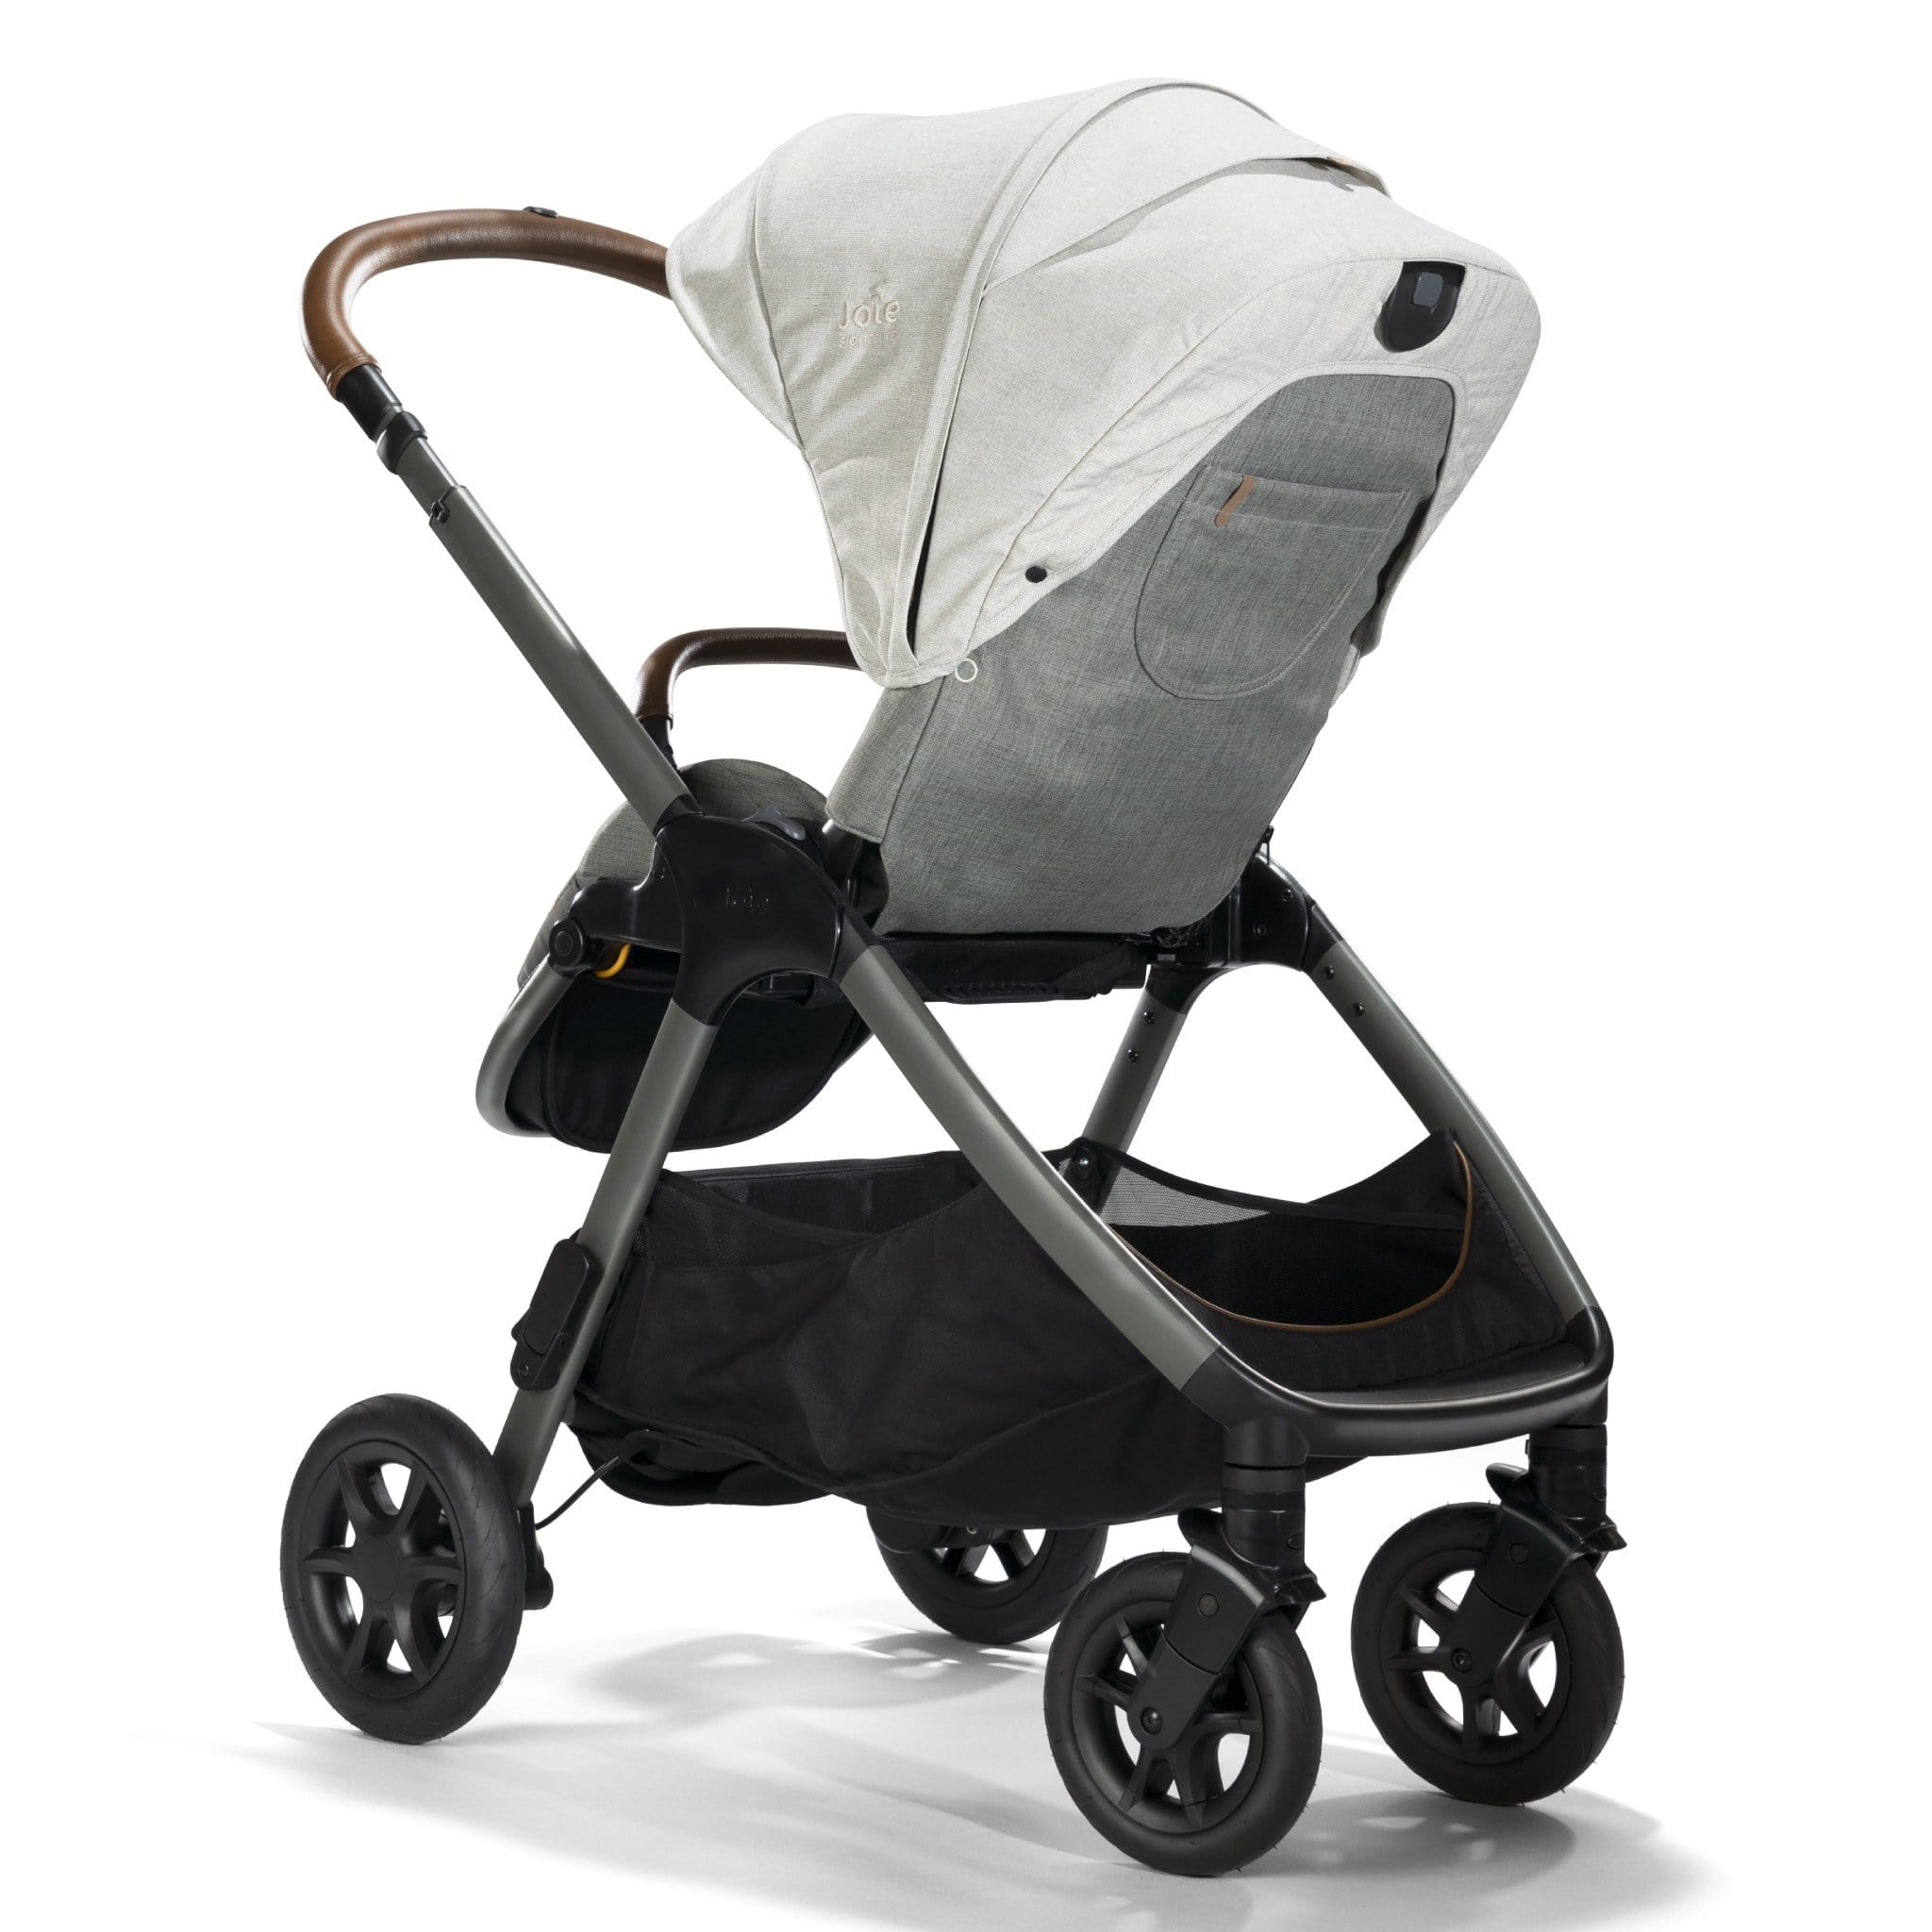 Joie baby prams Joie Finiti 4in1 Signature Edition Pushchair & Carrycot Oyster 9301-OYS